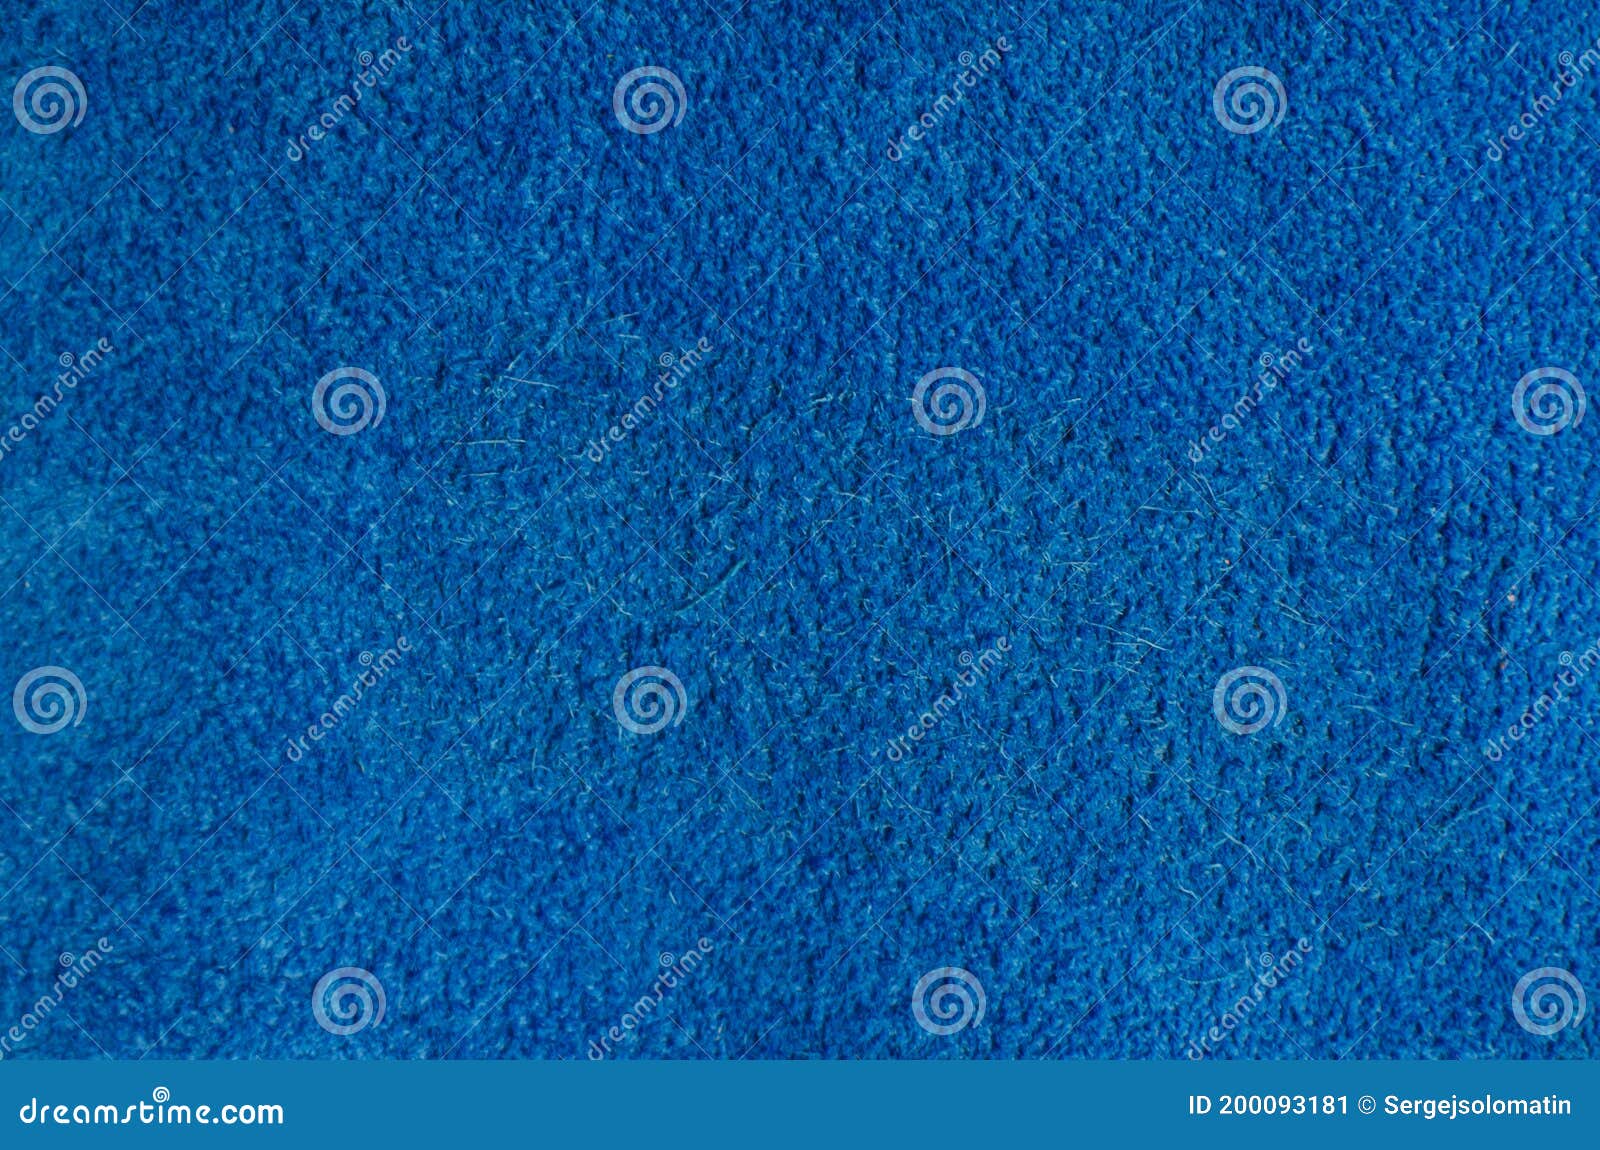 Blue Leather Texture or Background Stock Image - Image of blue, color ...